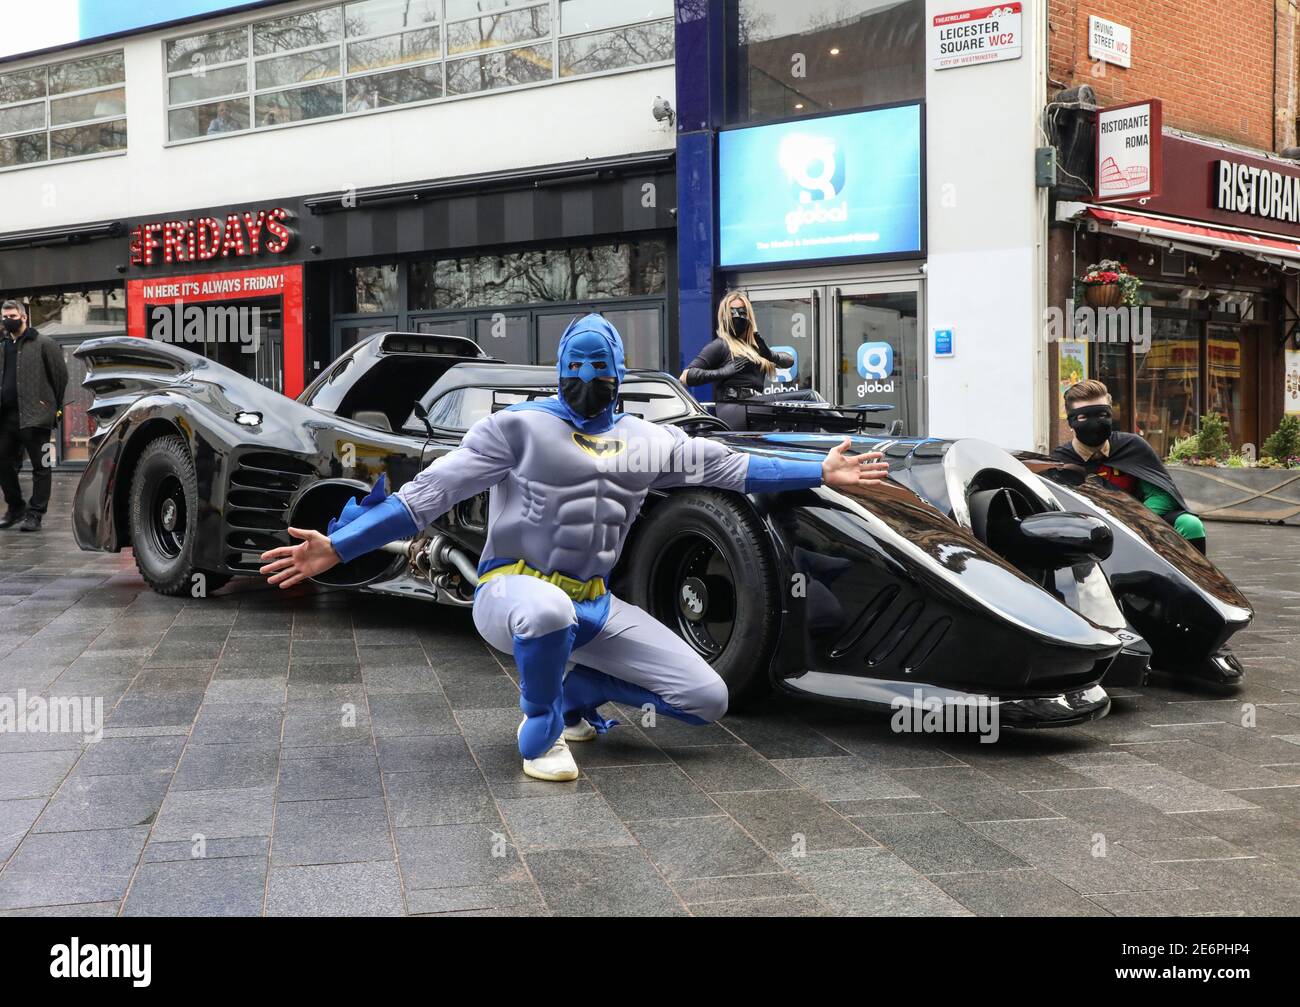 London, UK. 28th Jan, 2021. Roman Kemp, Sian Welby and Sonny Jay possing  outside Global the Radio.Capital Breakfast presenter Roman Kemp was  surprised with a ride in a batmobile outside the Capital